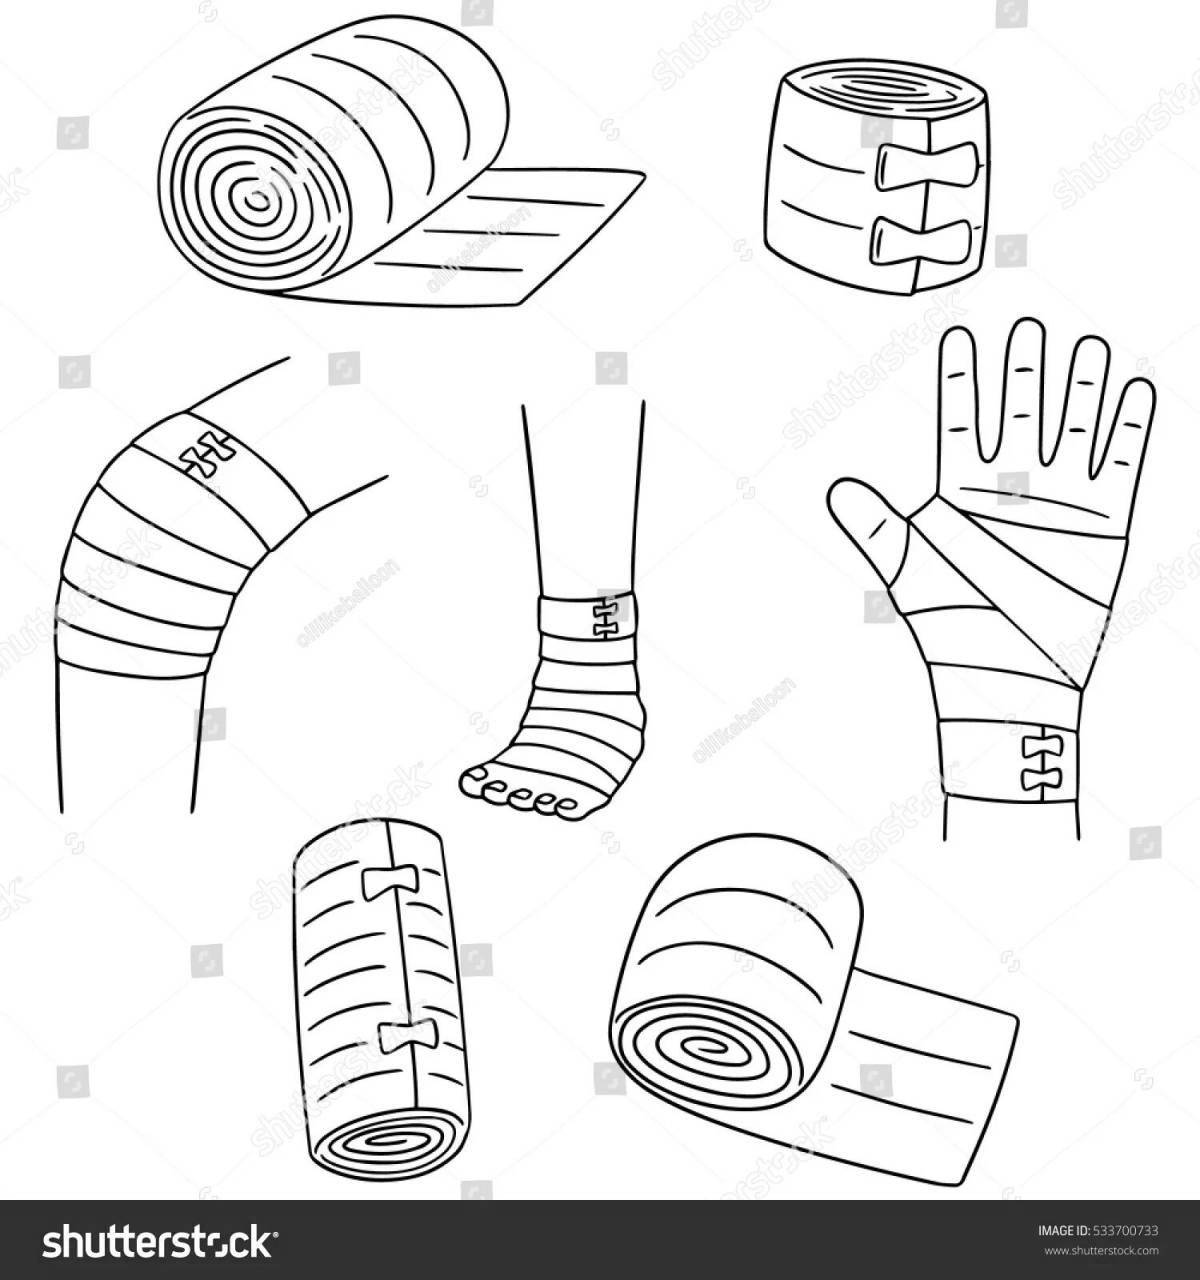 Coloring page mysterious bandage